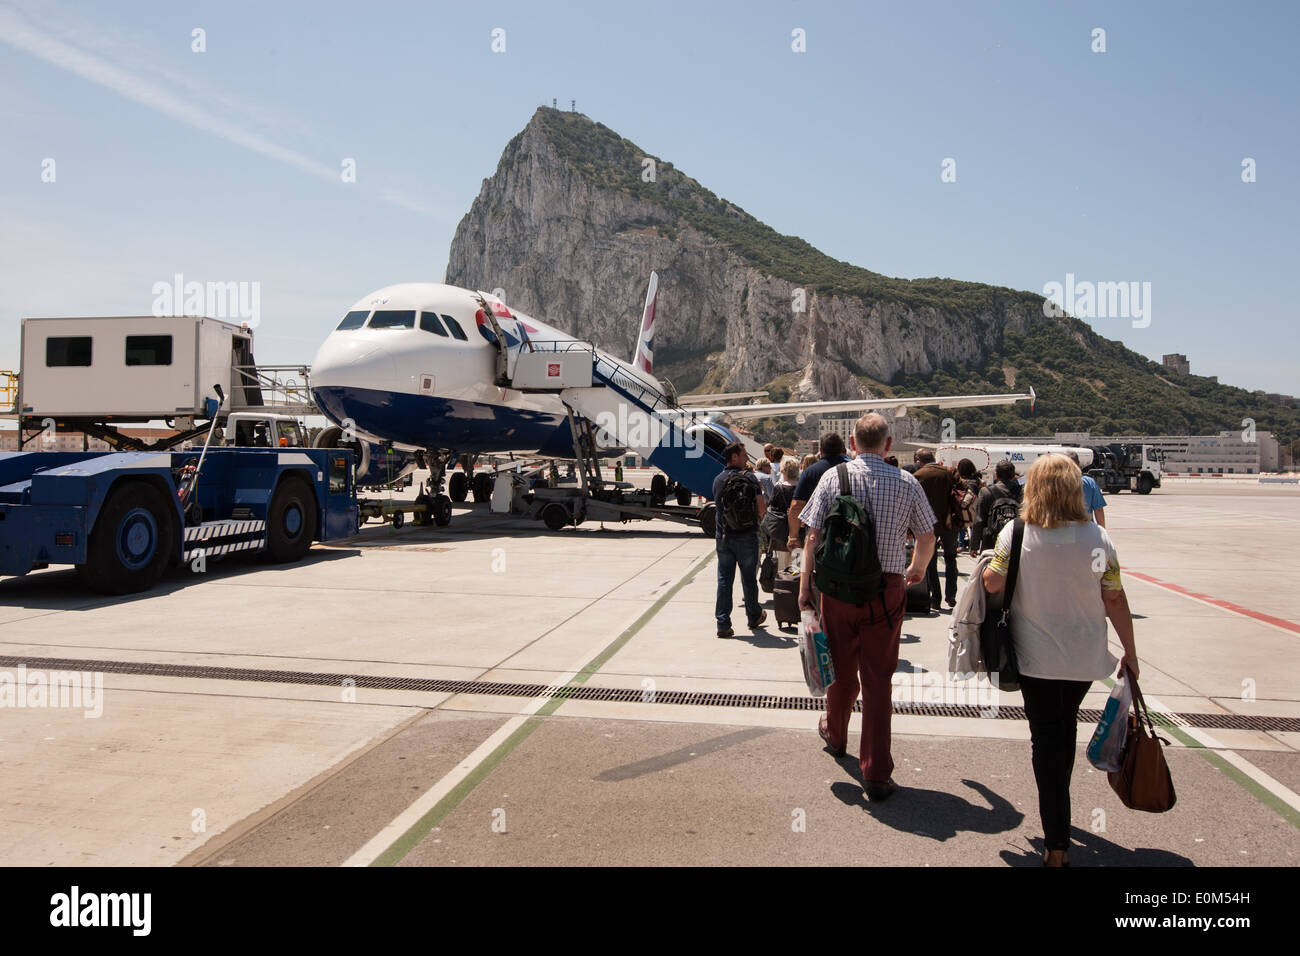 The Rock of Gibraltar seen from the airport Stock Photo - Alamy